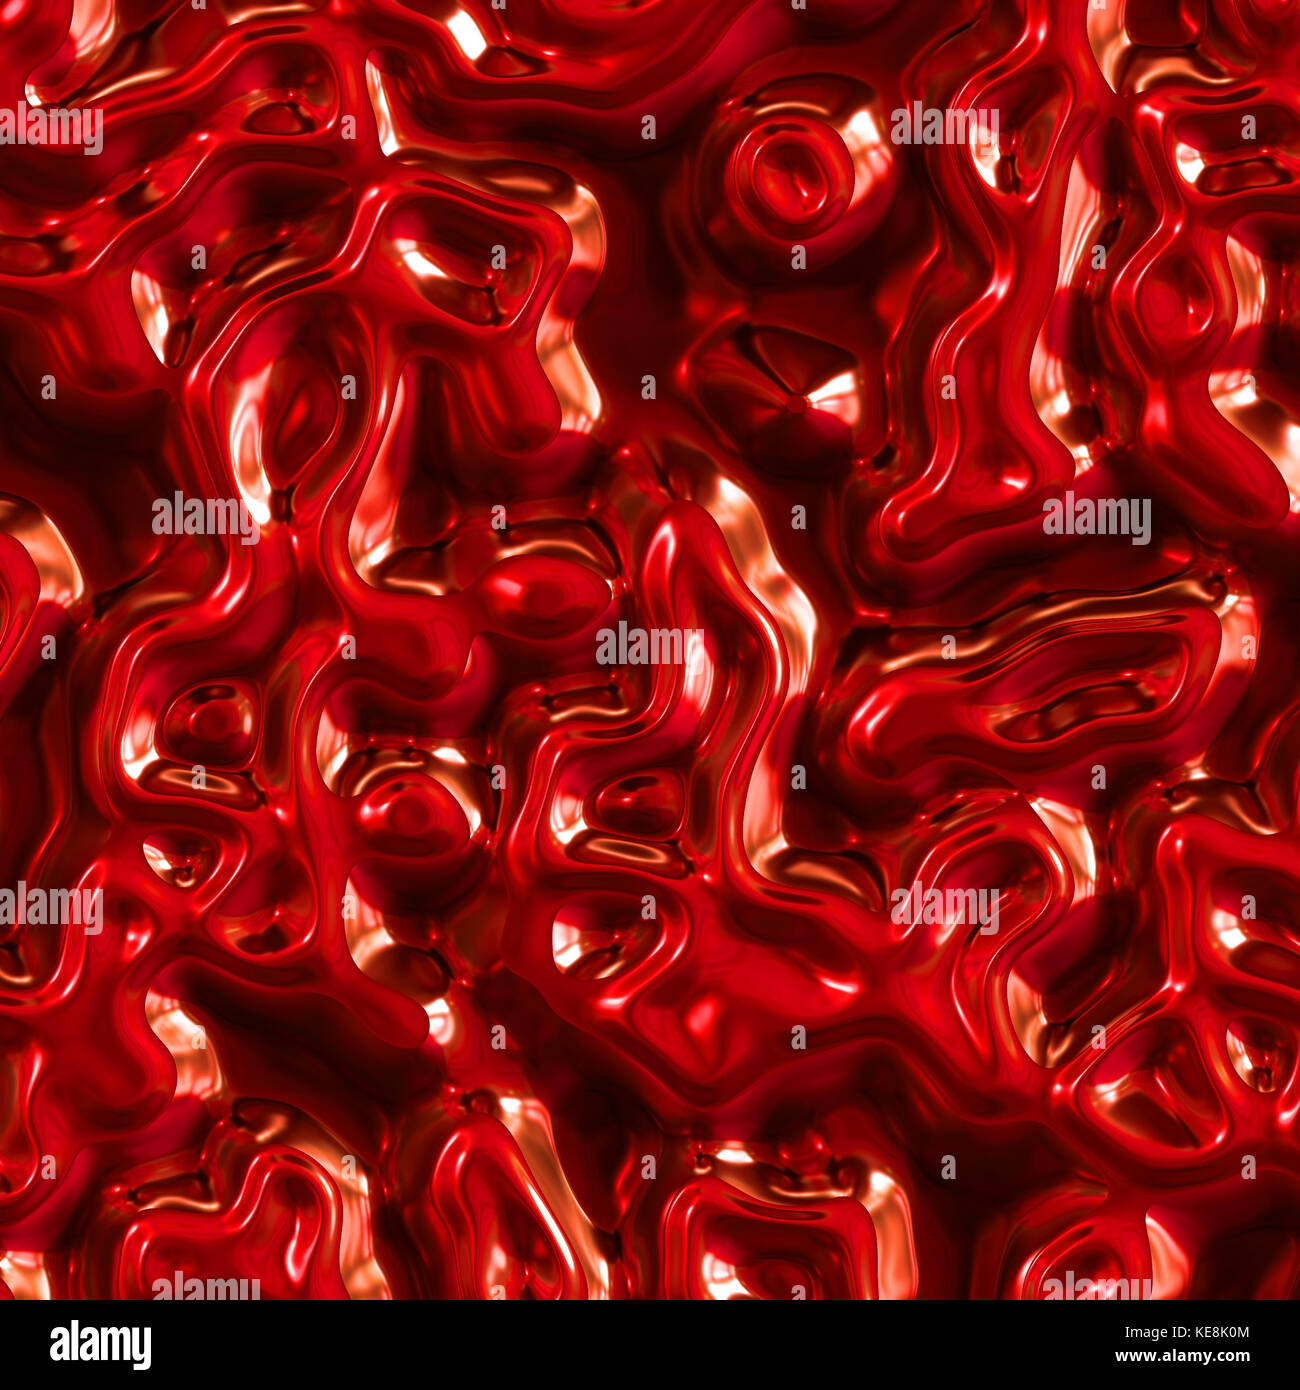 Glossy red material Stock Photo